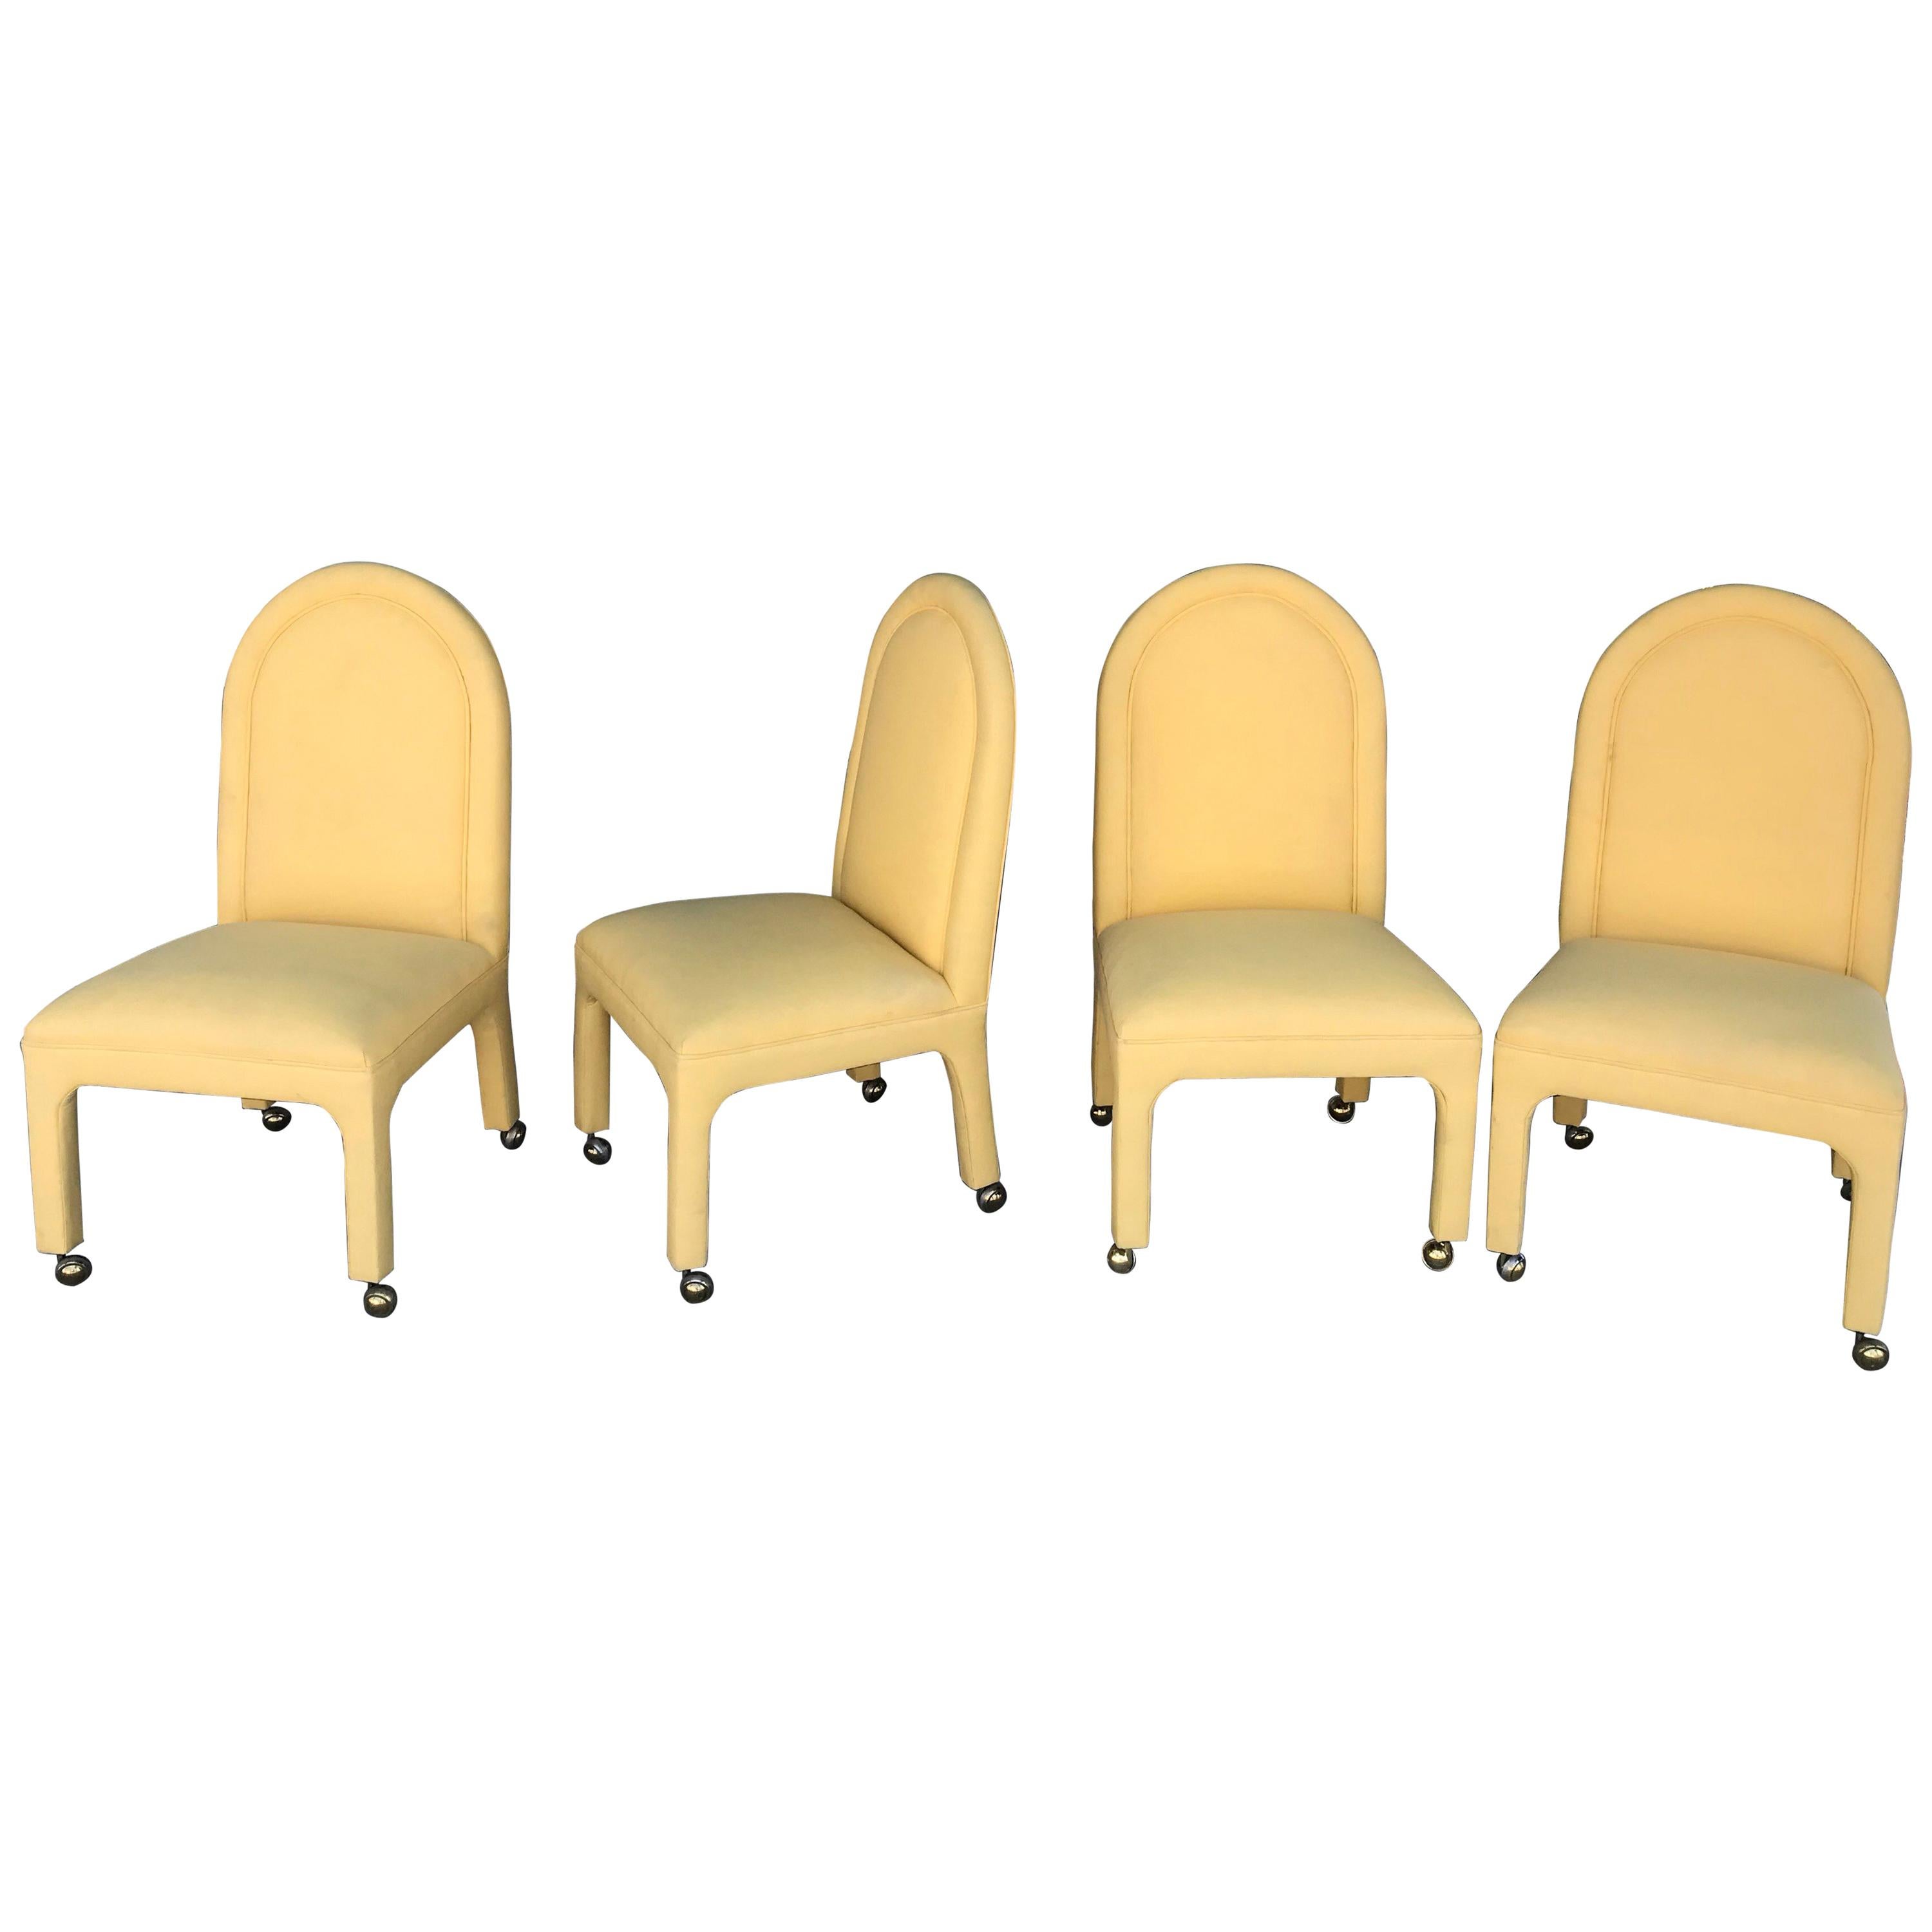 Set of Four Indoor or Outdoor Dining Chairs in Yellow Sunbrella Fabric